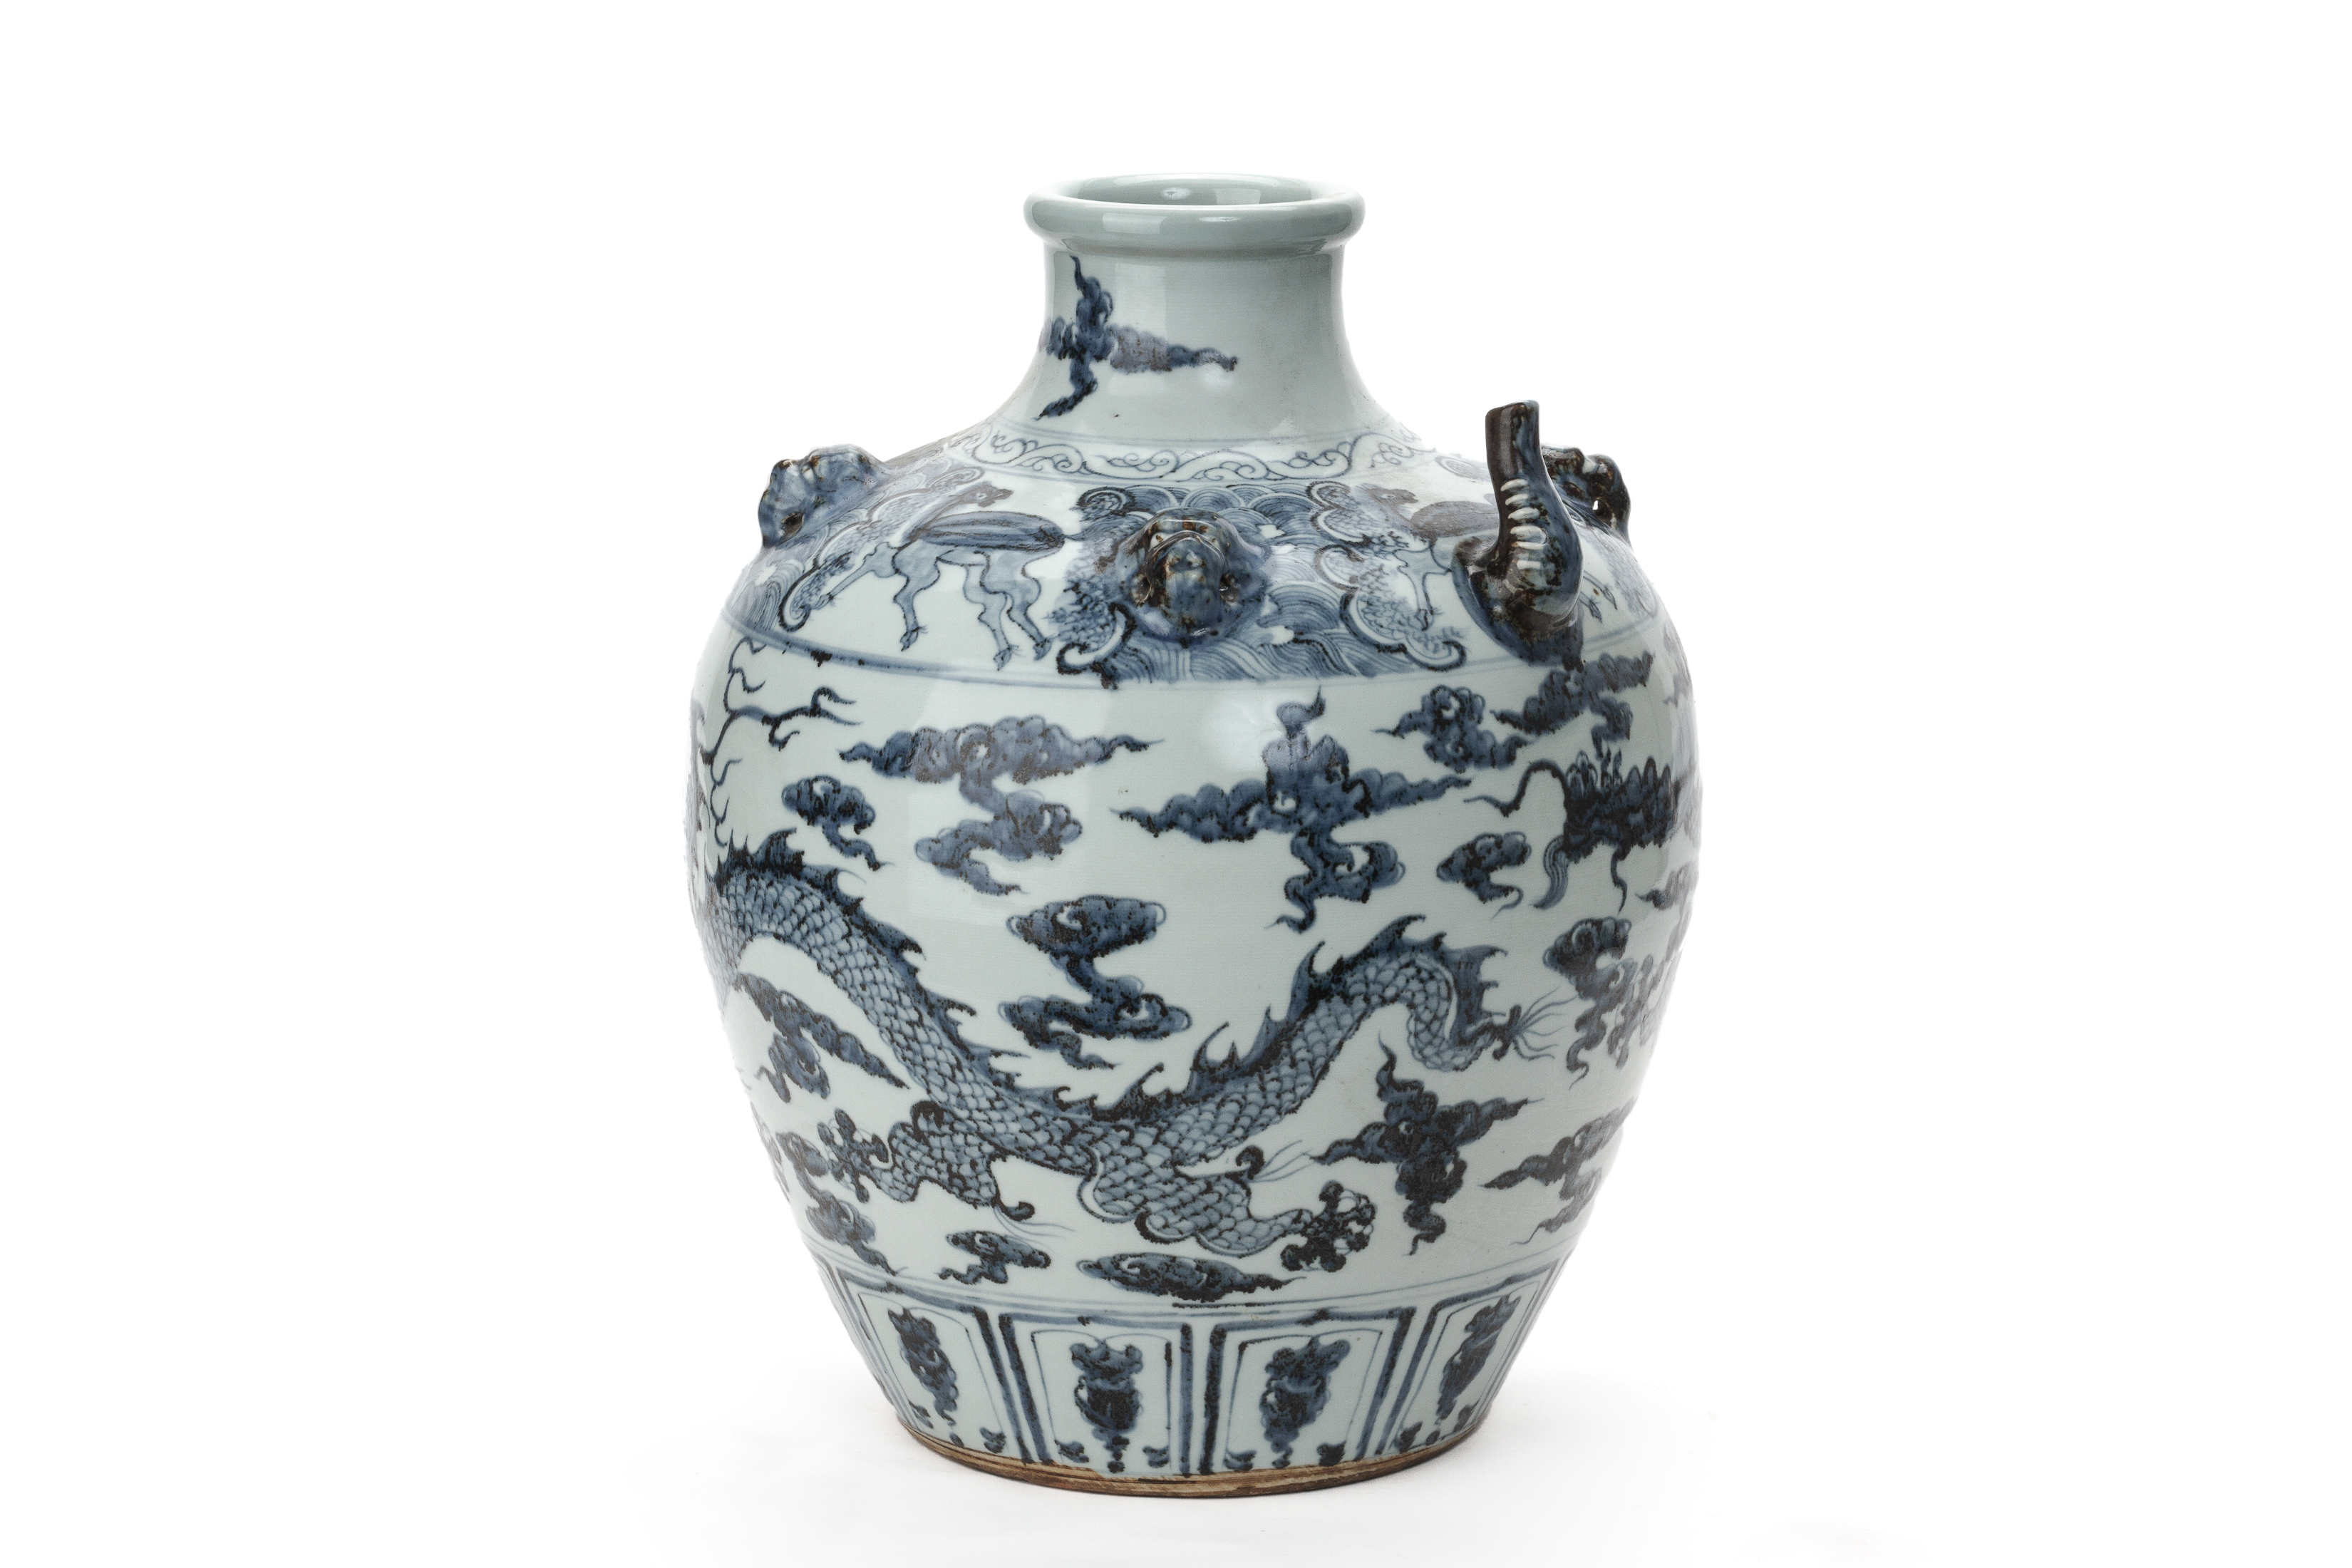 A LARGE YUAN STYLE BLUE AND WHITE PORCELAIN JAR